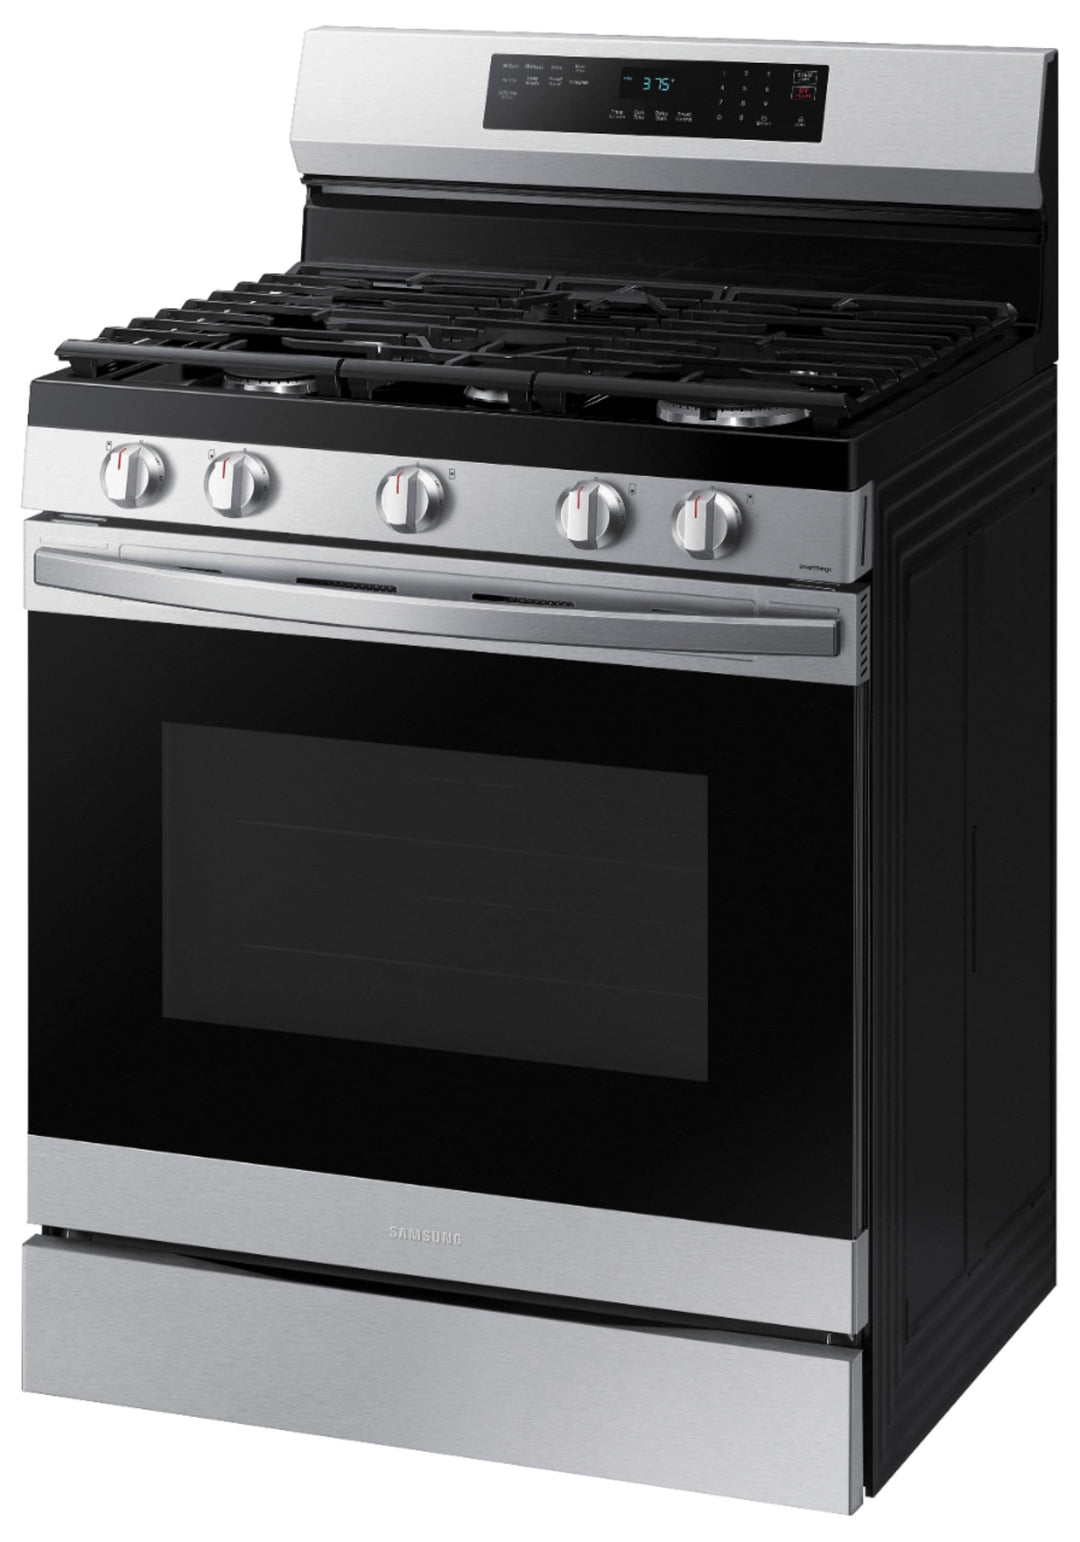 Samsung - 6.0 cu. ft. Freestanding Gas Range with WiFi, No-Preheat Air Fry & Convection - Stainless steel_2